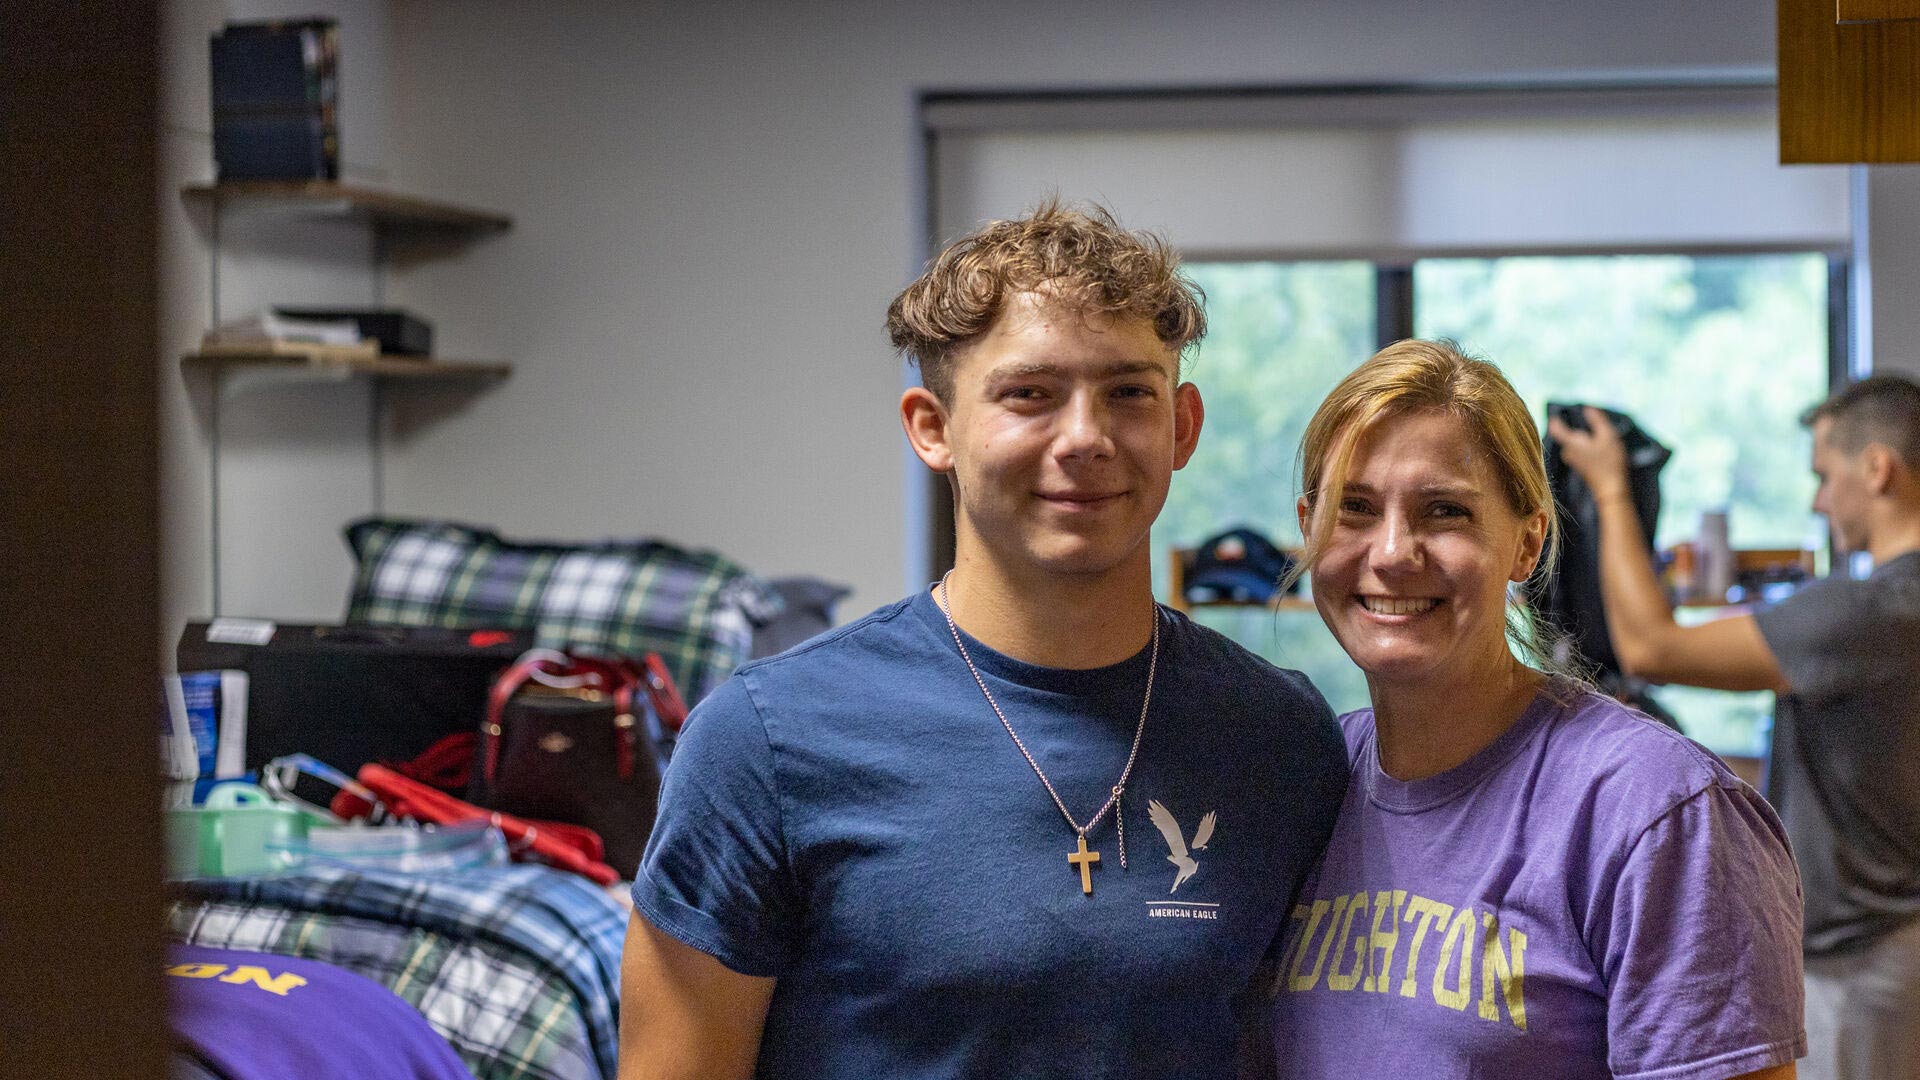 Houghton student with mother moving into dorm room.